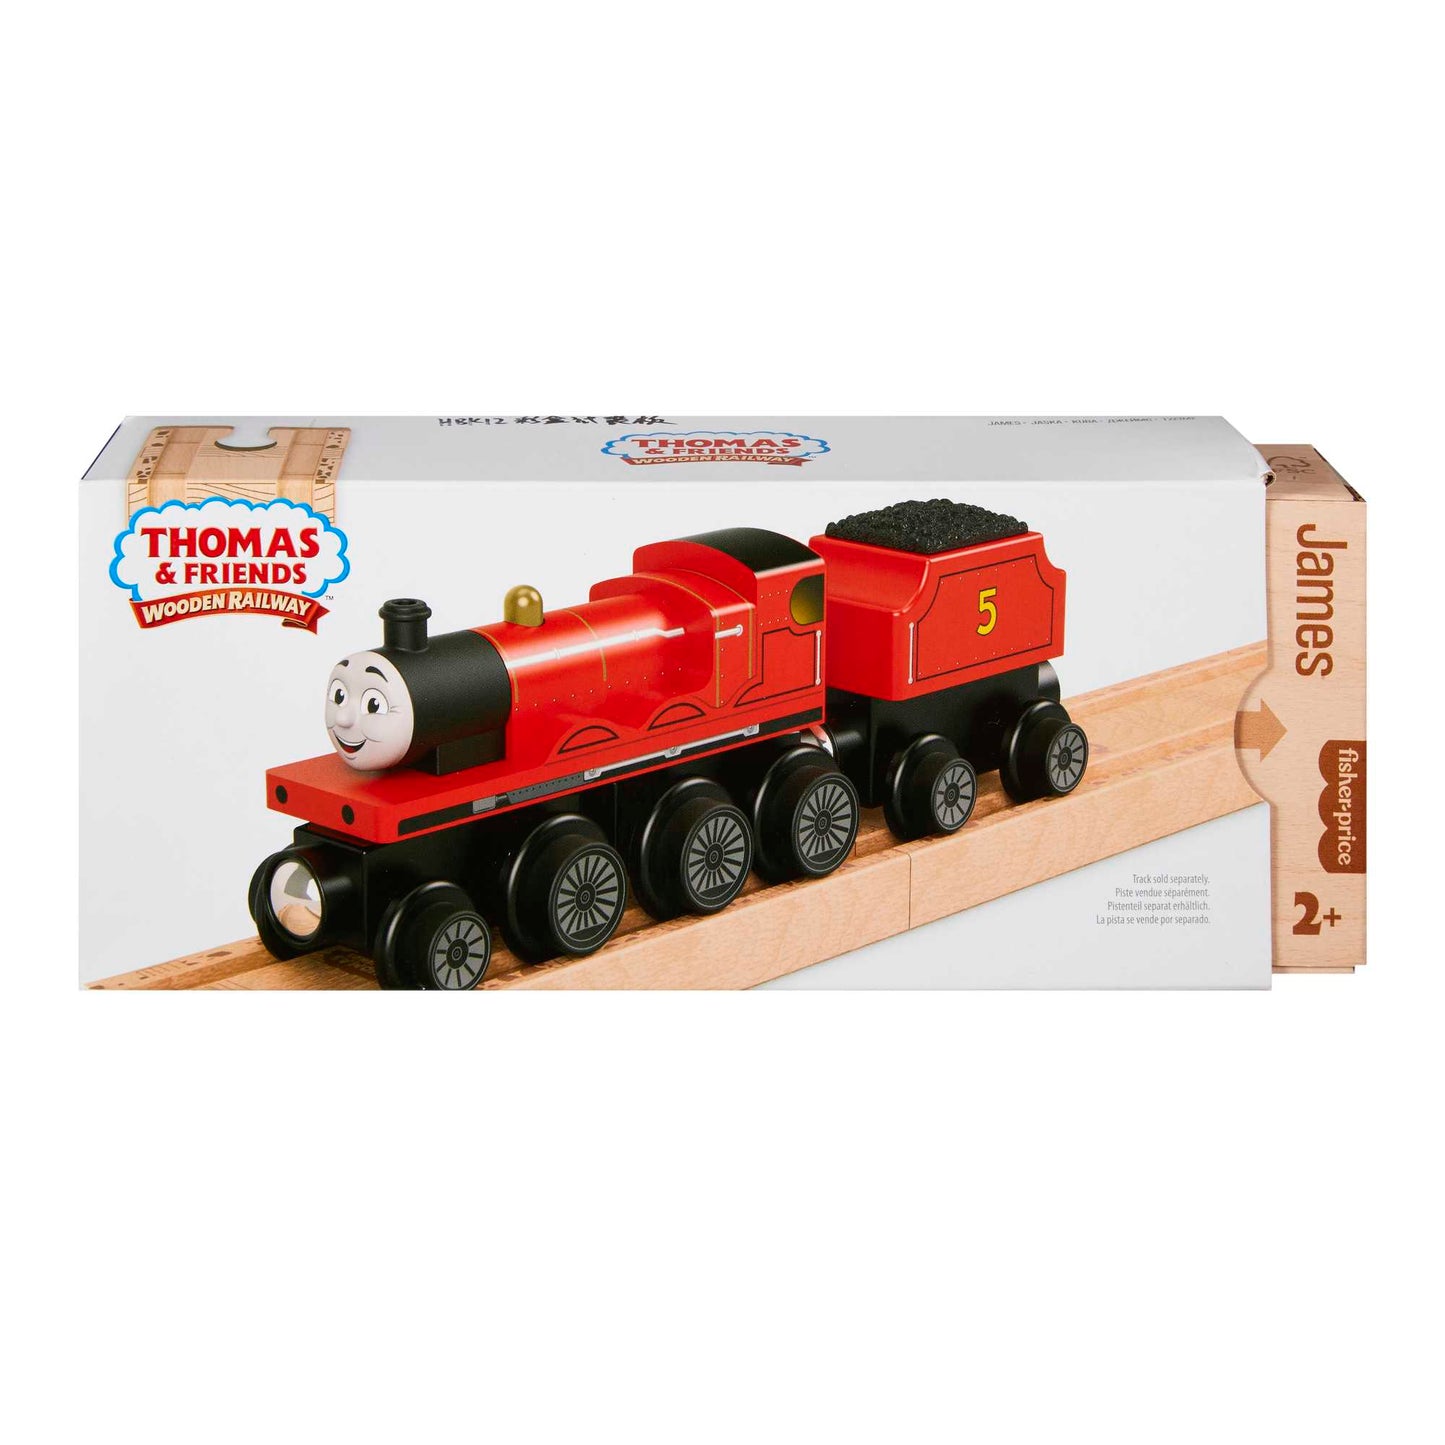 Fisher-Price Thomas & Friends Wooden Railway James Engine and Coal-Car